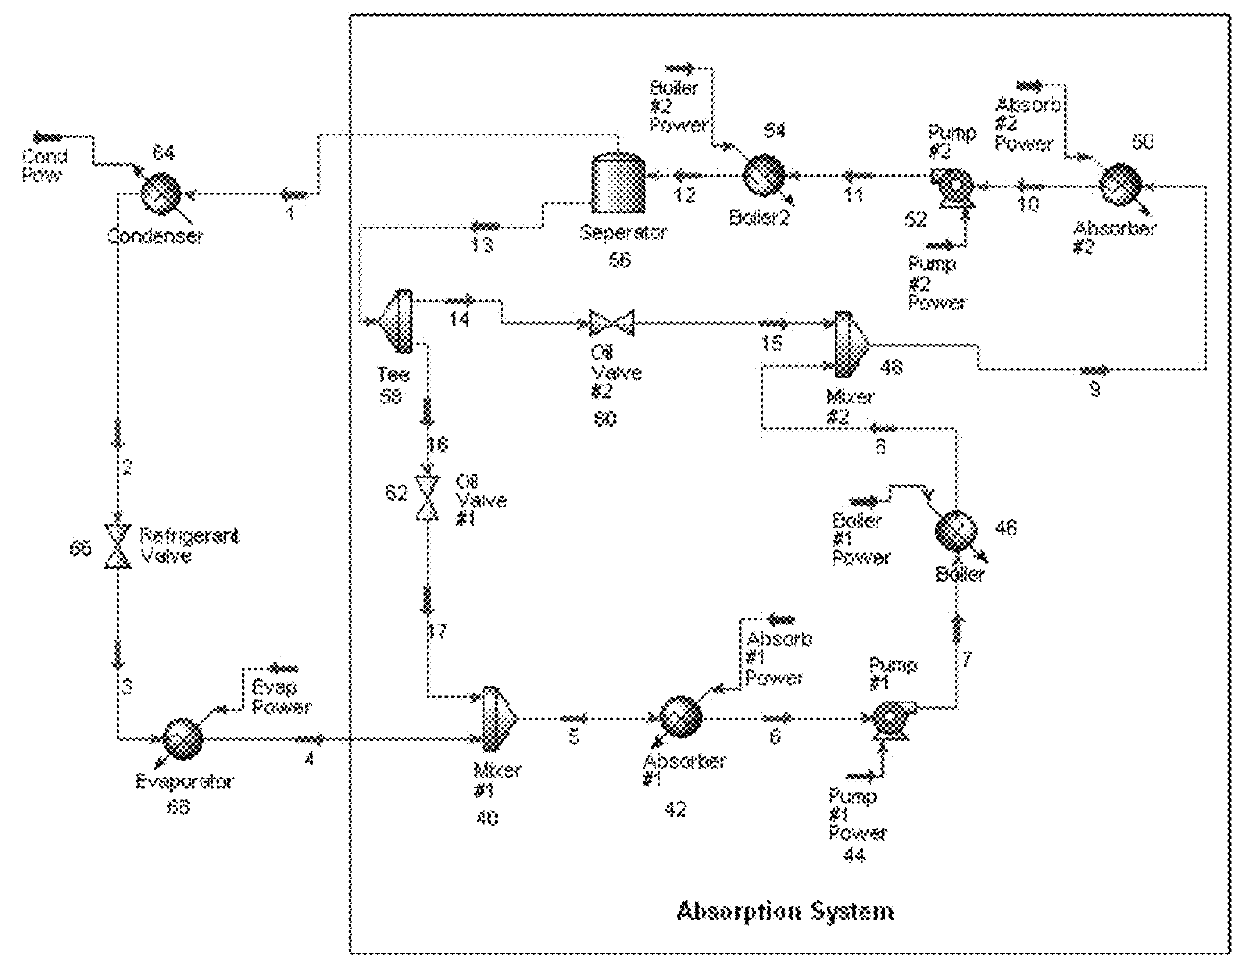 Absorption refrigeration cycles using a LGWP refrigerant